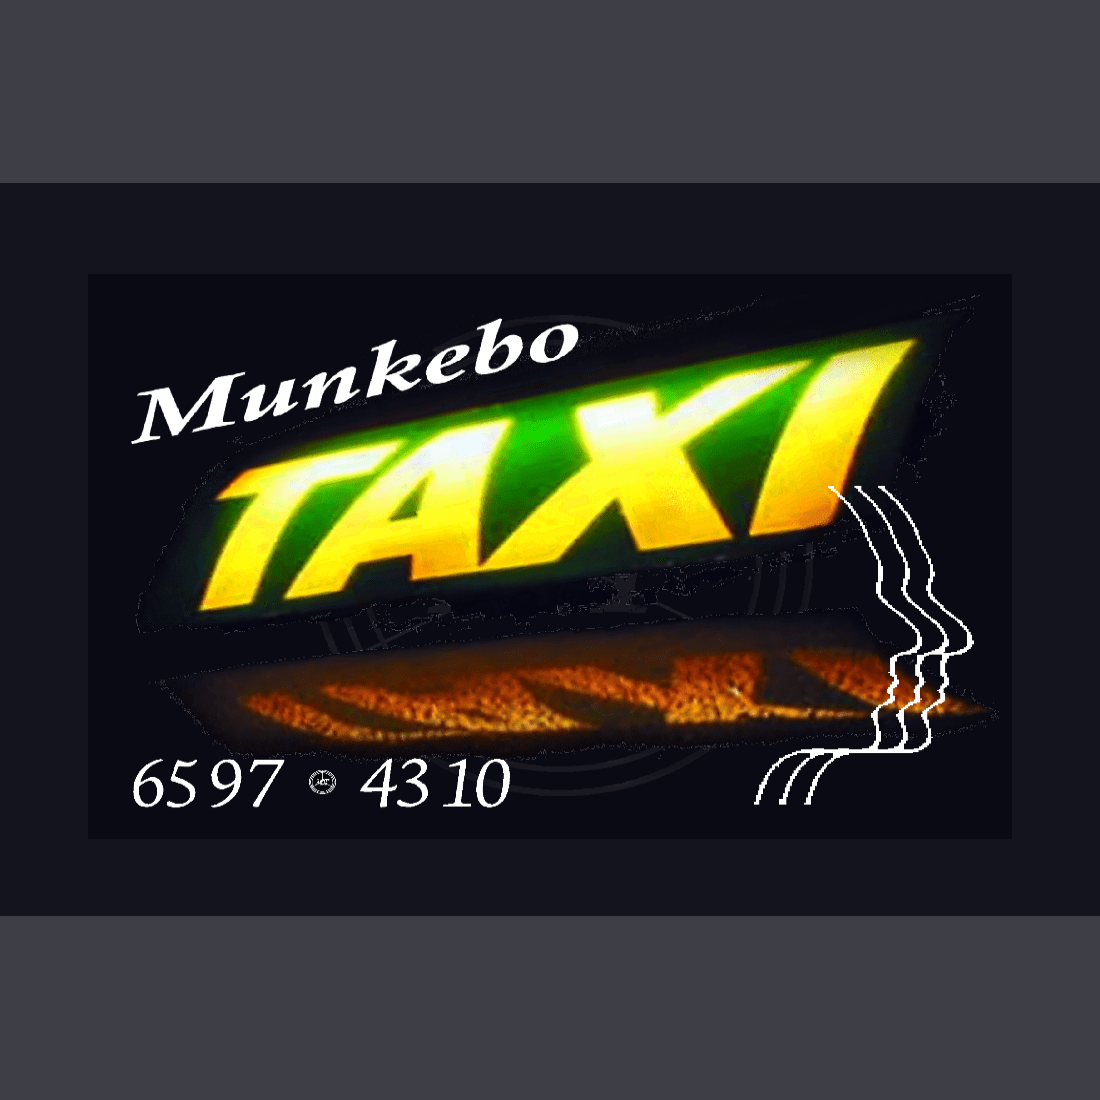 Creation for https://www.munkebotaxi.dk. COVER MUNKEBO TAXI DRIVERS FACEBOOK BY KANOBI® © Drivers card Munkebo Taxi cover Cover Munkebo Taxi drivers facebook by Kanobi®